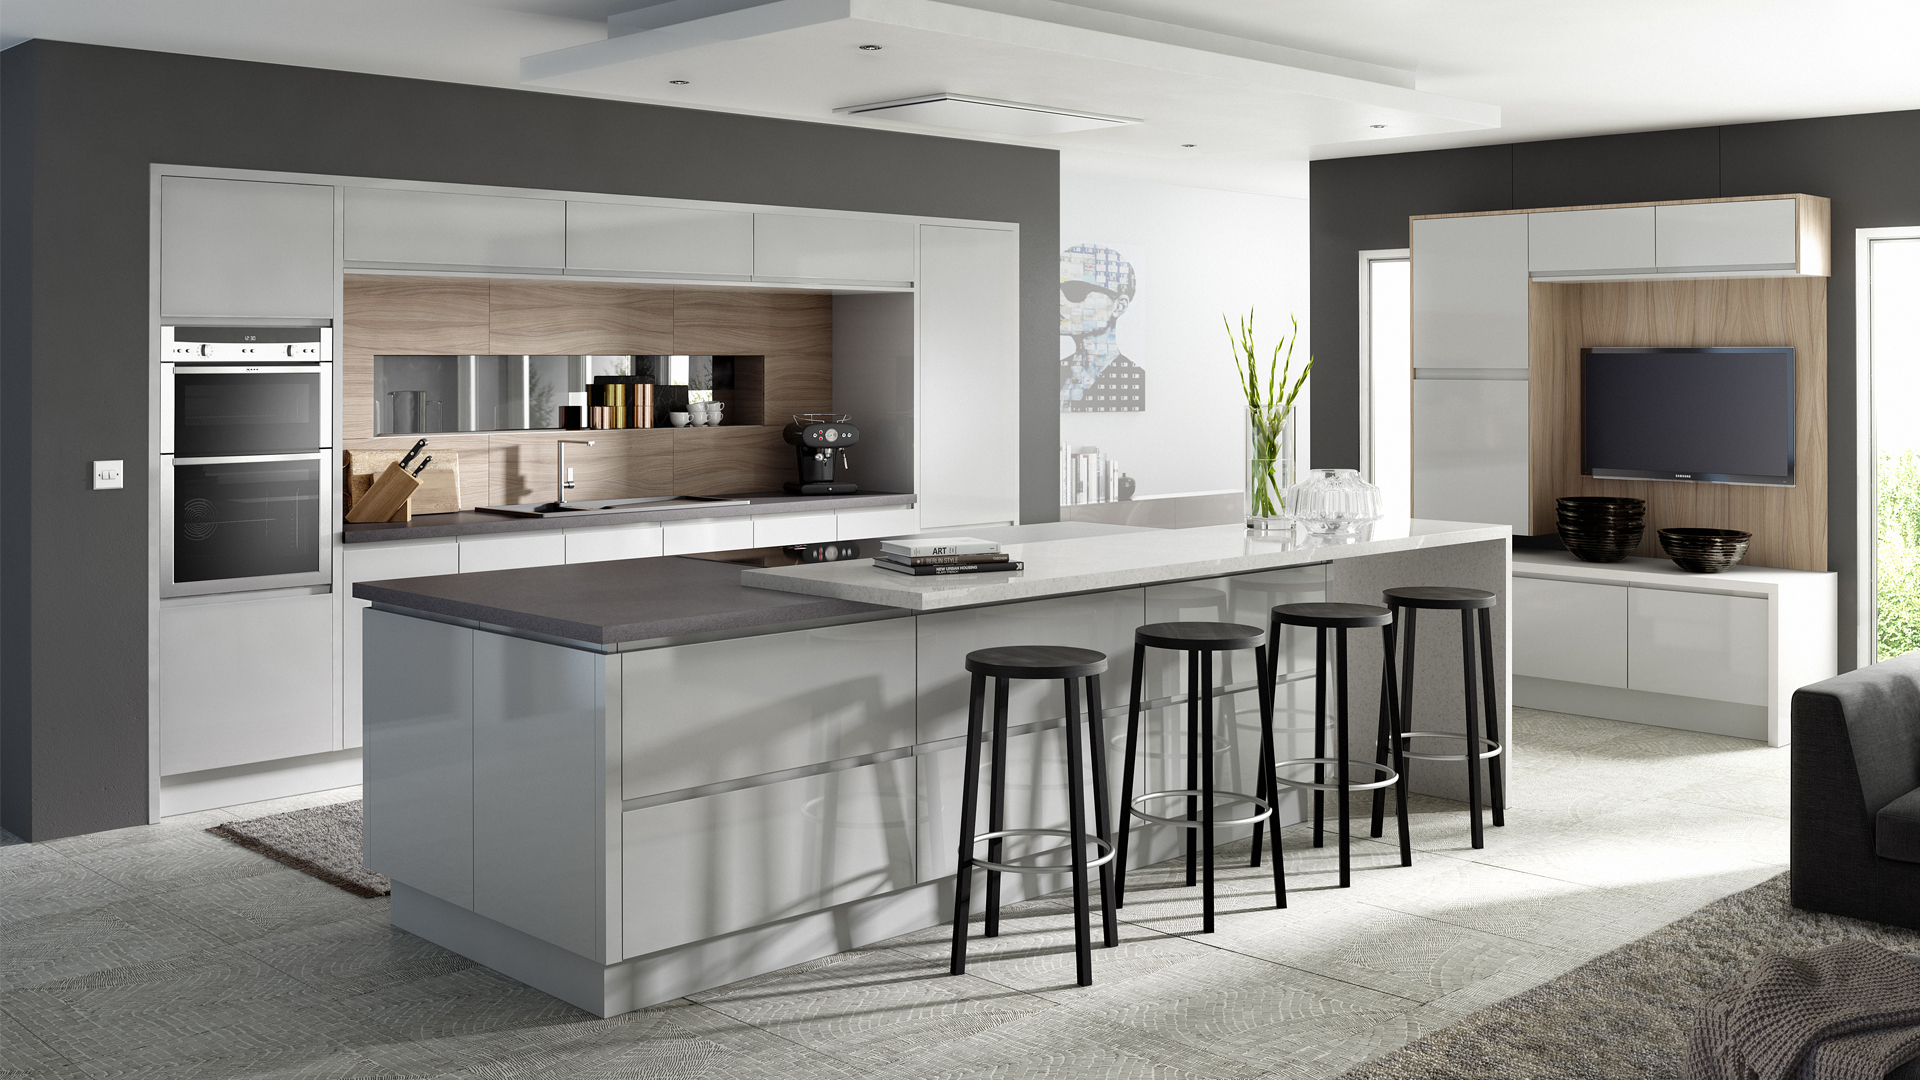 Why should you select a linear kitchen?